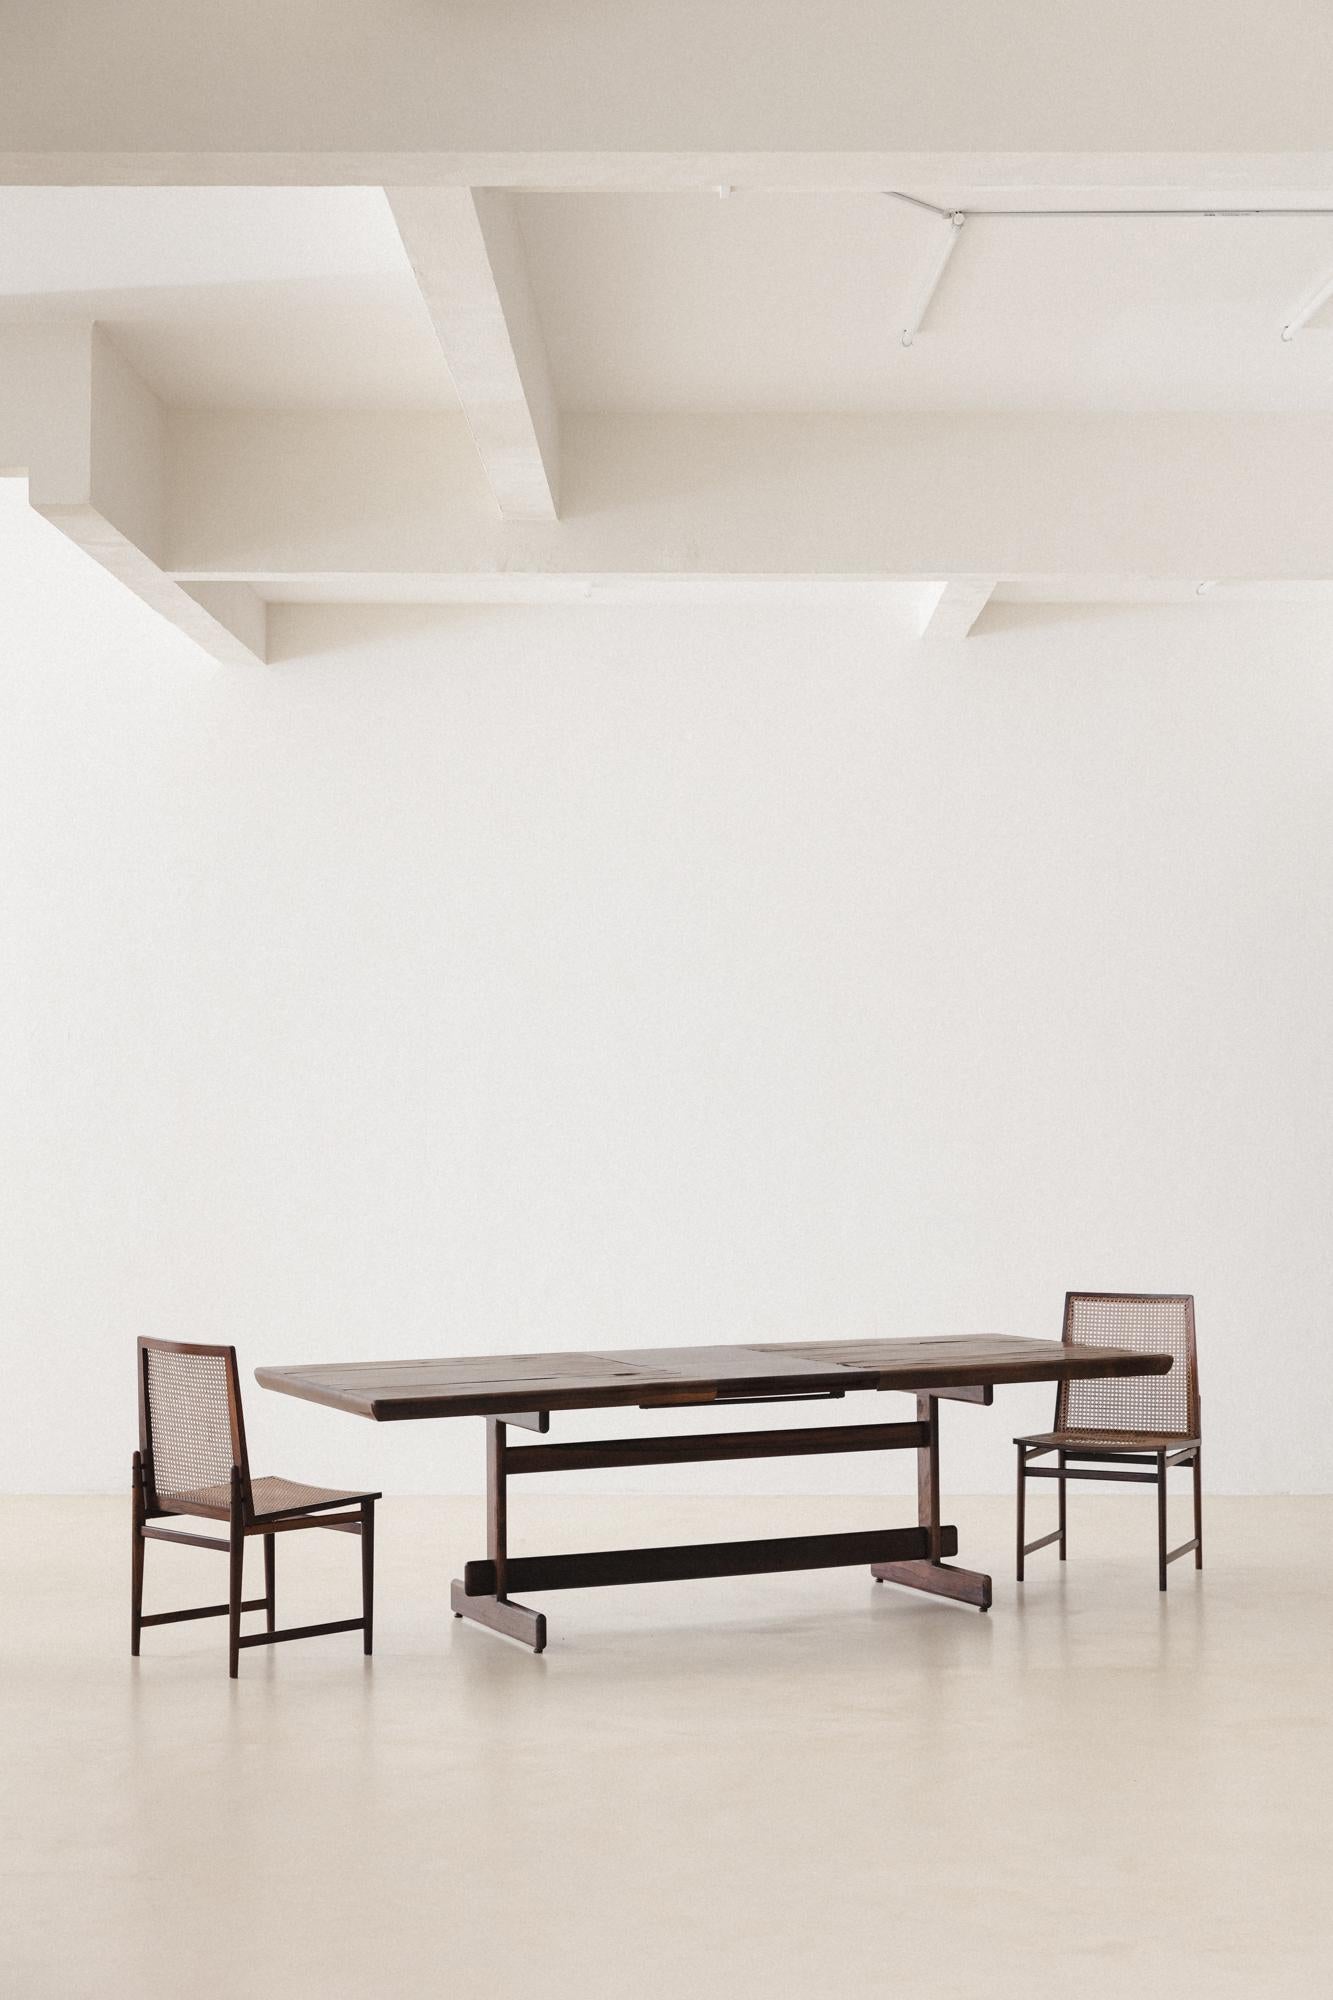 This Dining Table was produced by Cantù Móveis e Interiores Ltda. in the 1960s. The eight-seat table made of solid Rosewood with a veneered top is extendable for ten seats, with a practical engine at the table's center.

Architects Jorge Jabour